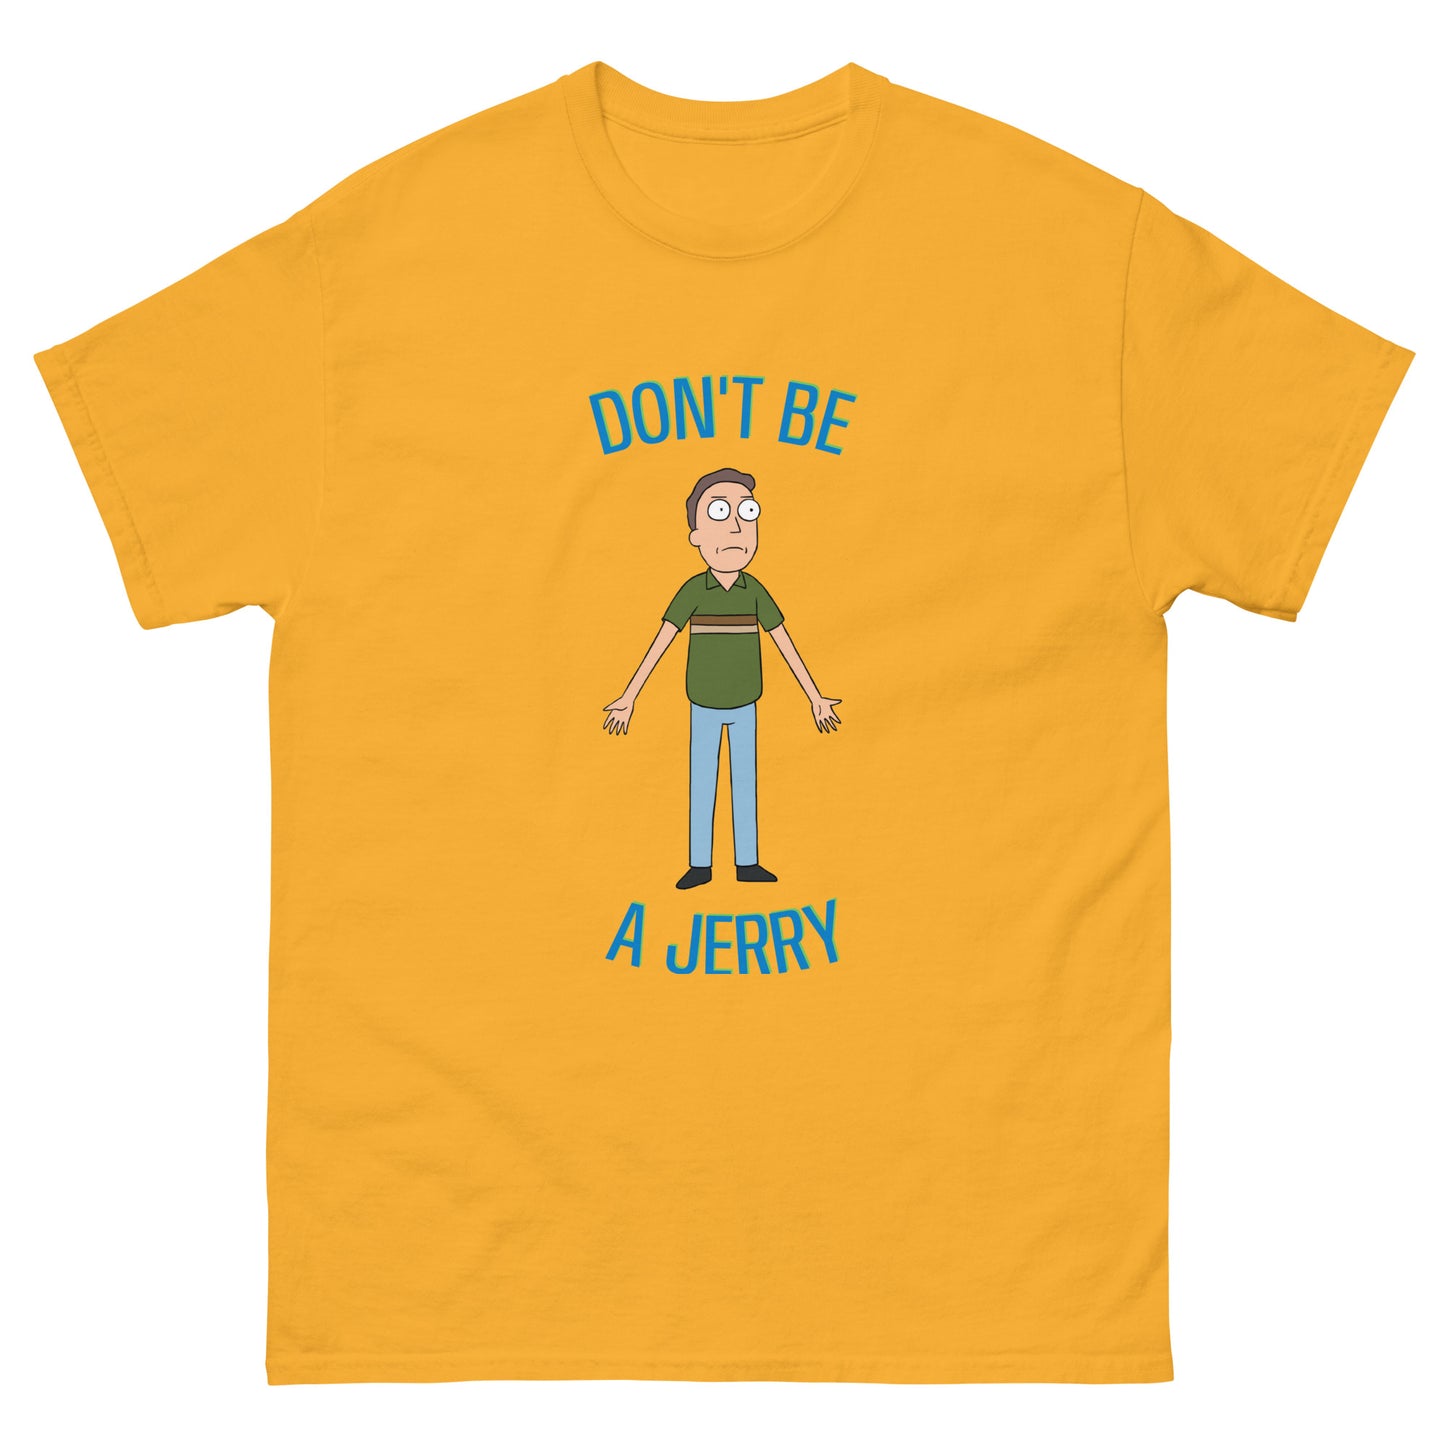 Don't Be a Jerry T-Shirt